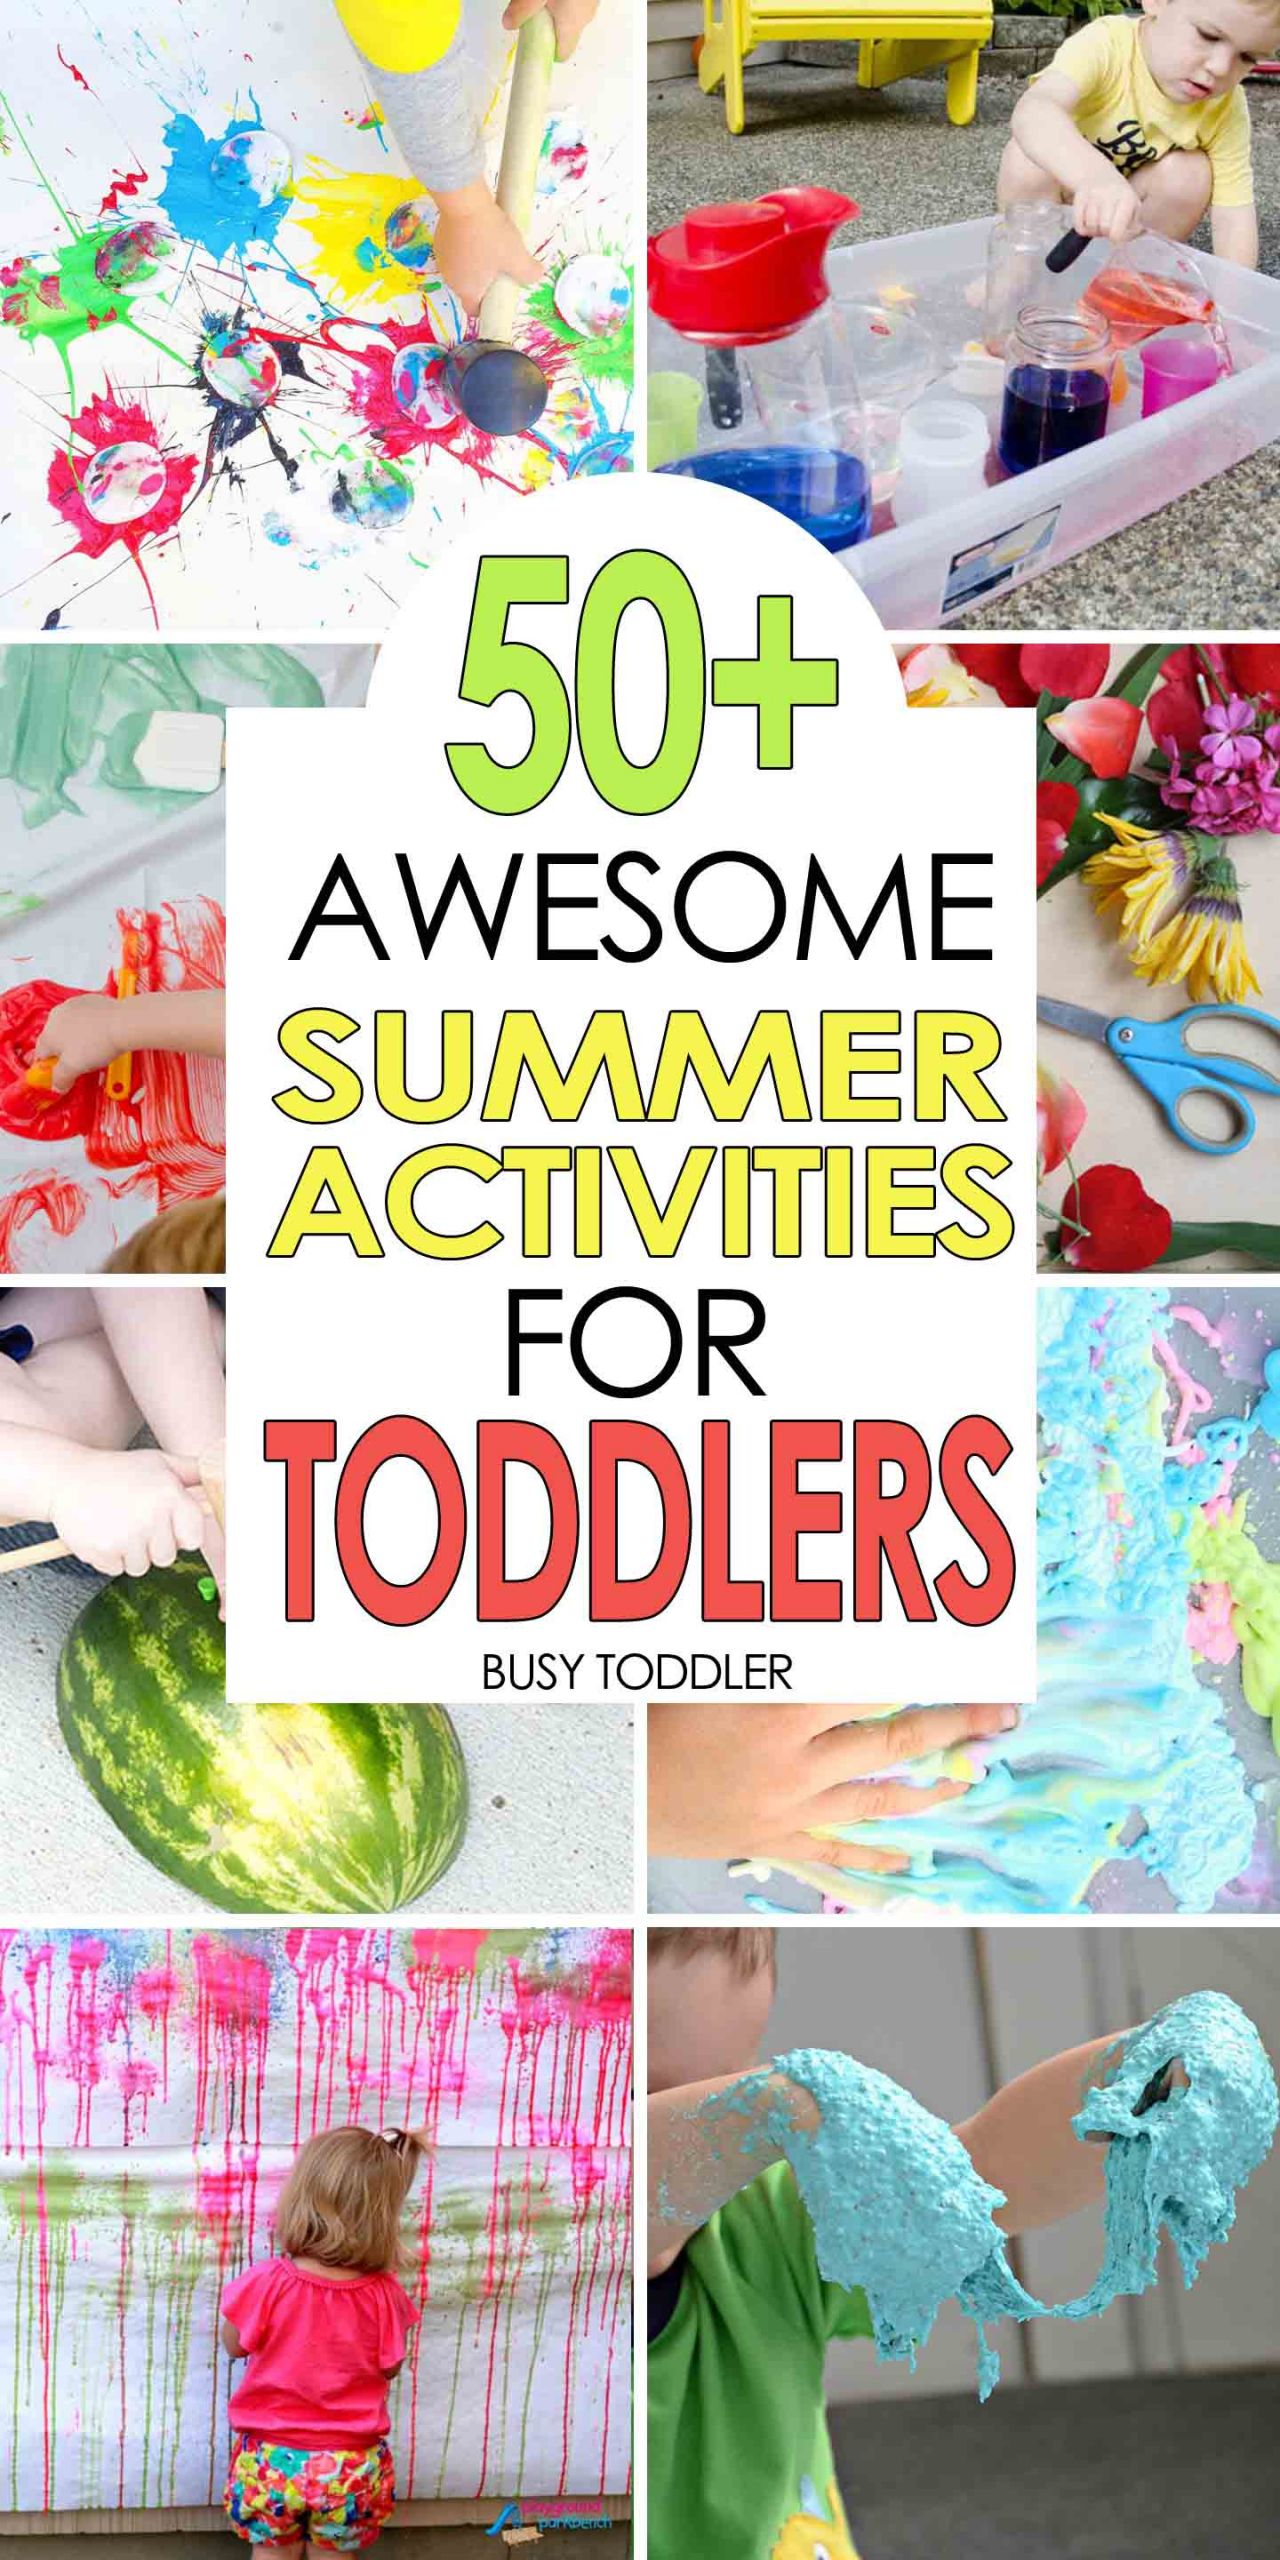 Summer Art Activities
 50 Awesome Summer Activities for Toddlers Busy Toddler